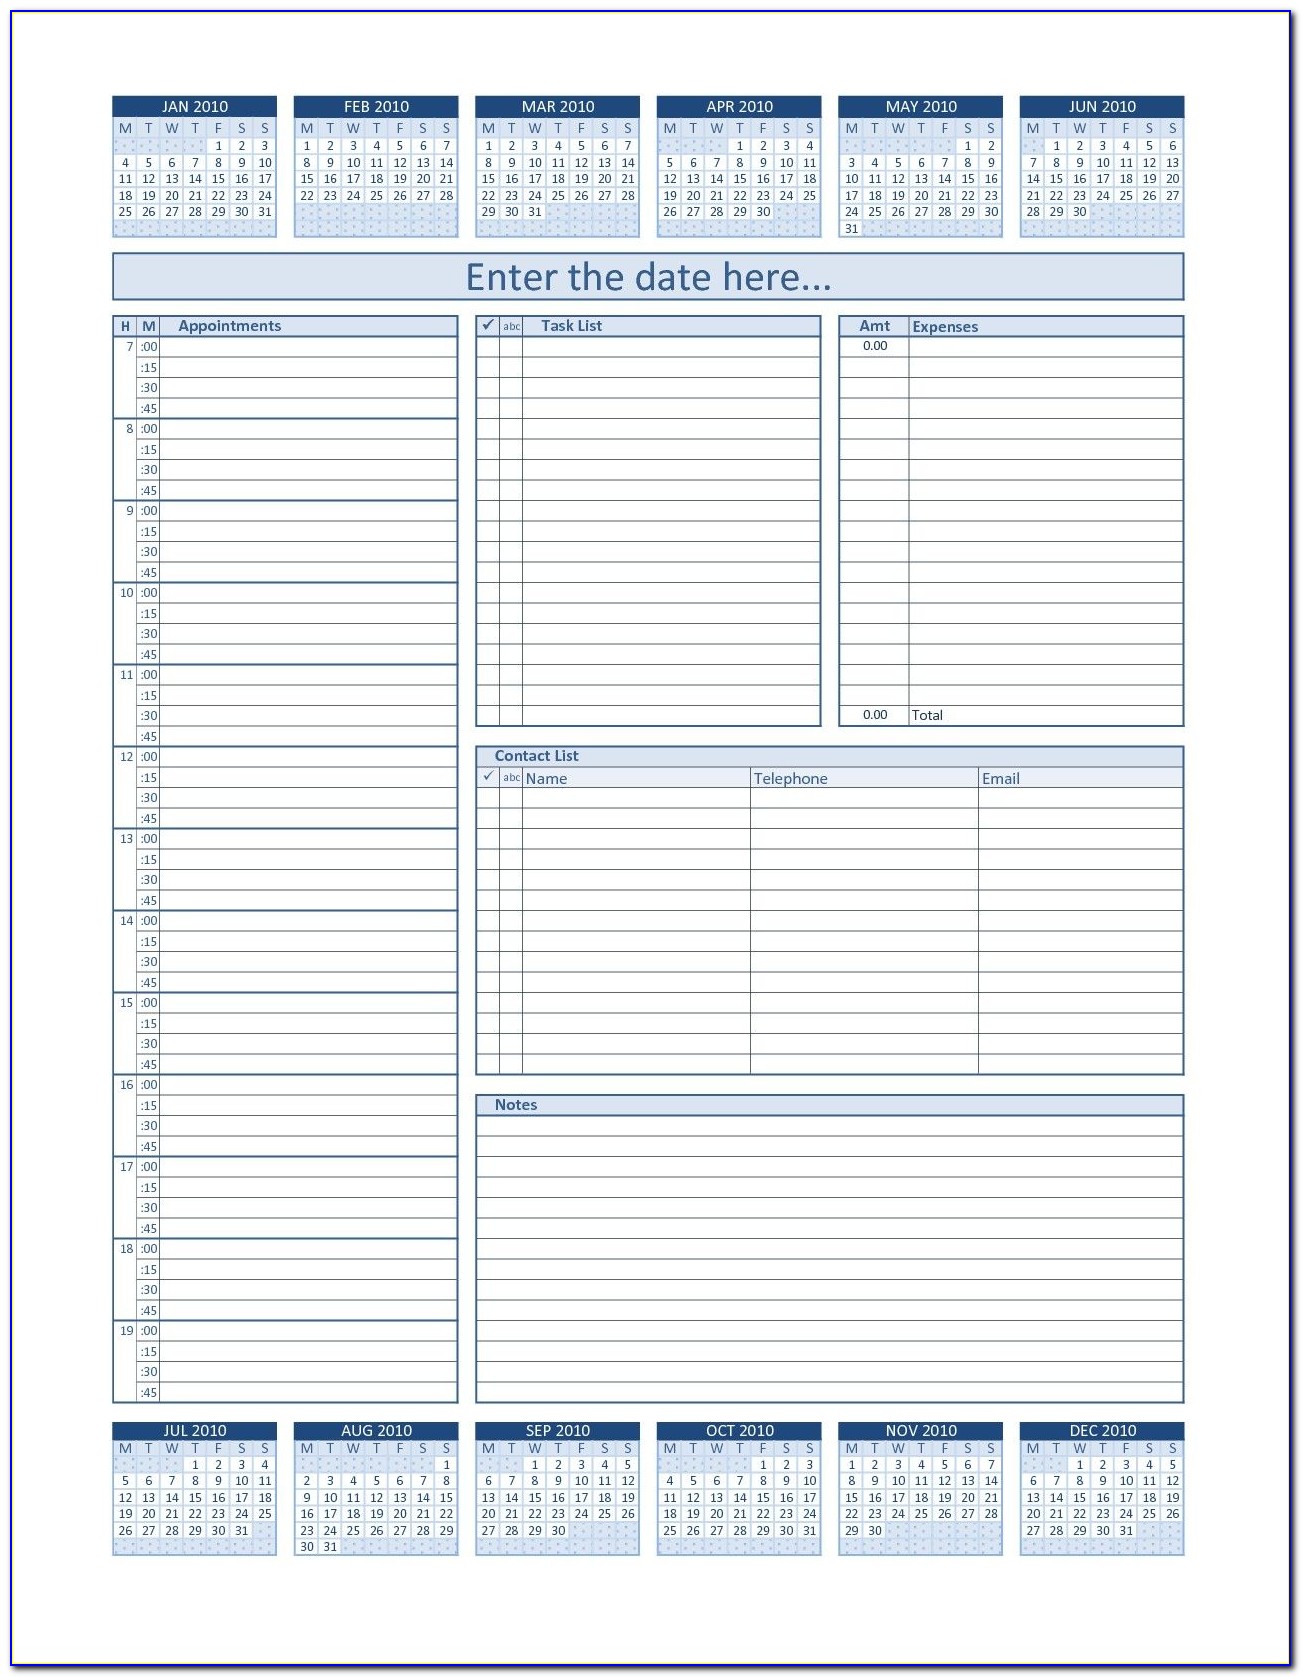 Franklin Covey Weekly Planner Template Excel